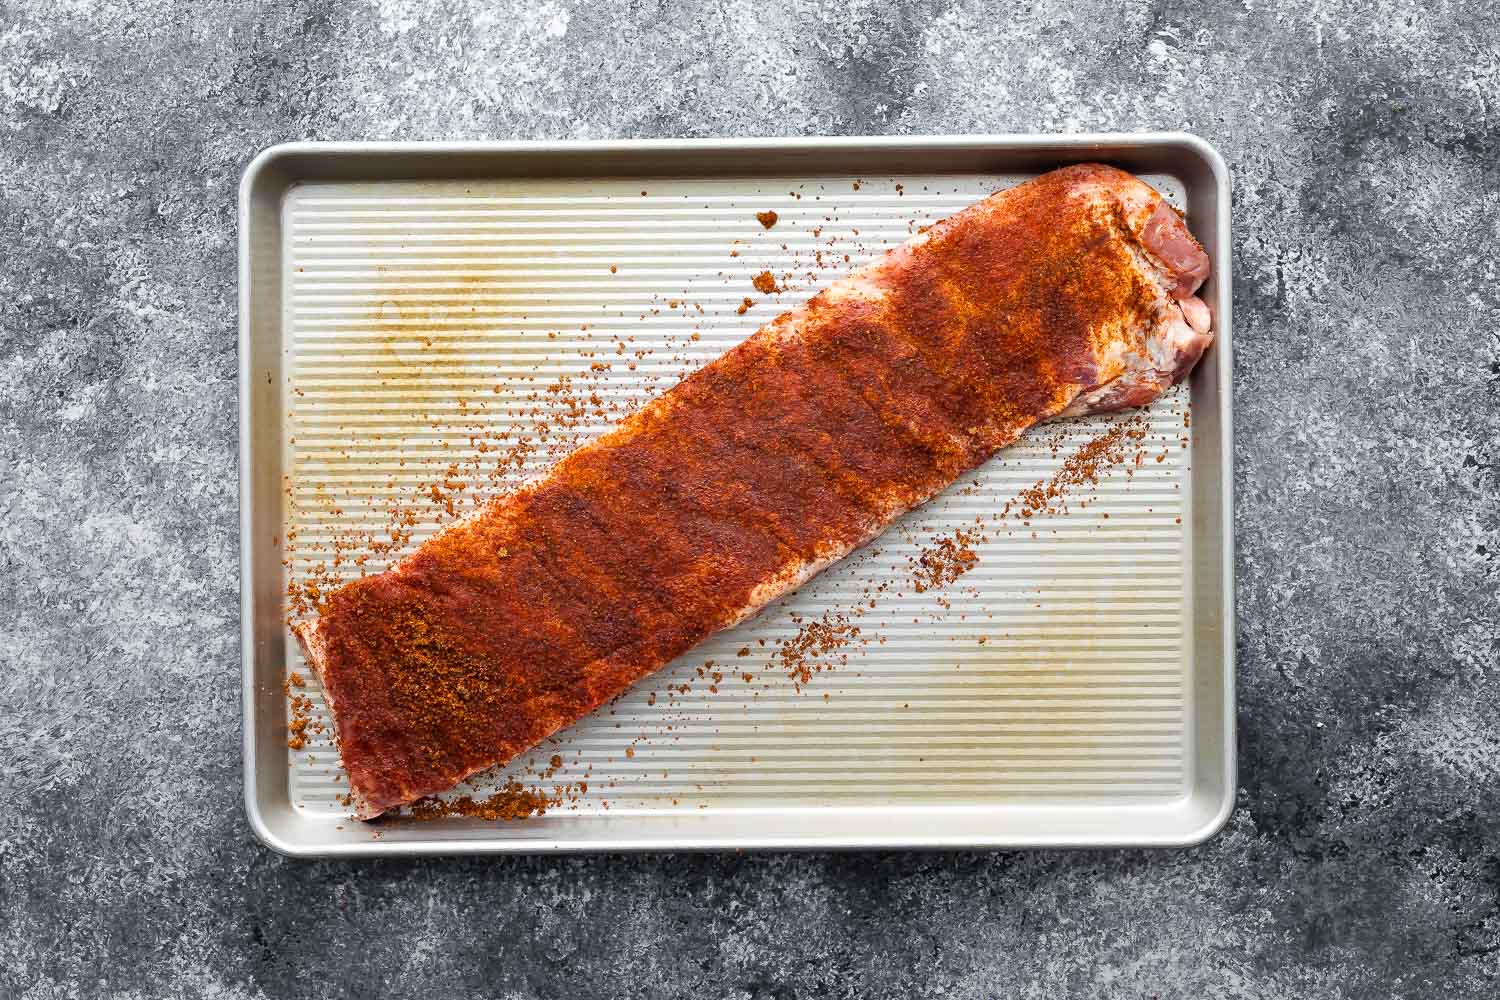 rack of ribs coated in dry rub on baking sheet